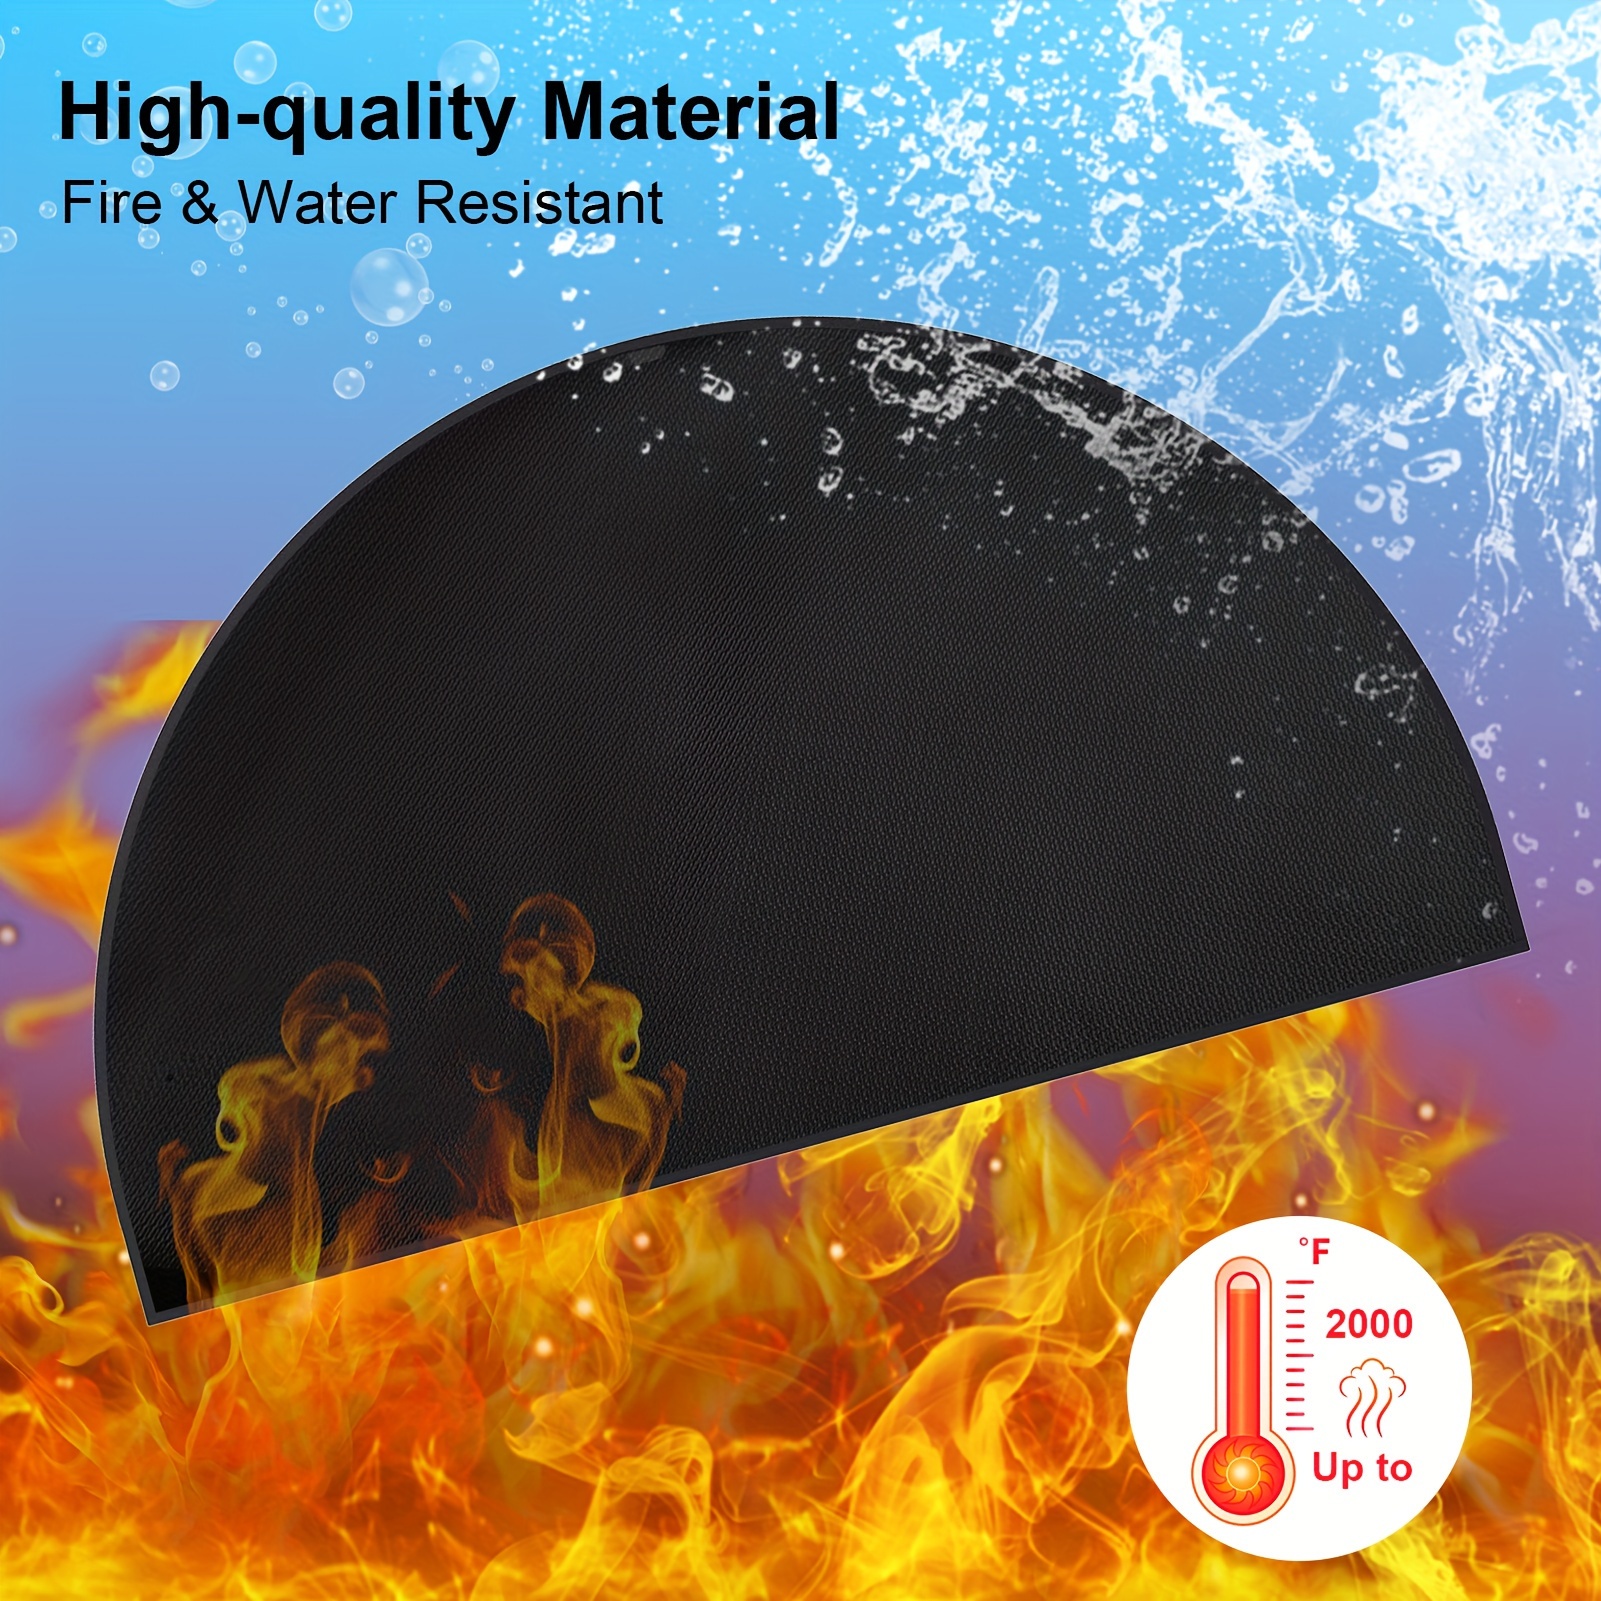 heat-resistant waterproof insulation material for fireplaces